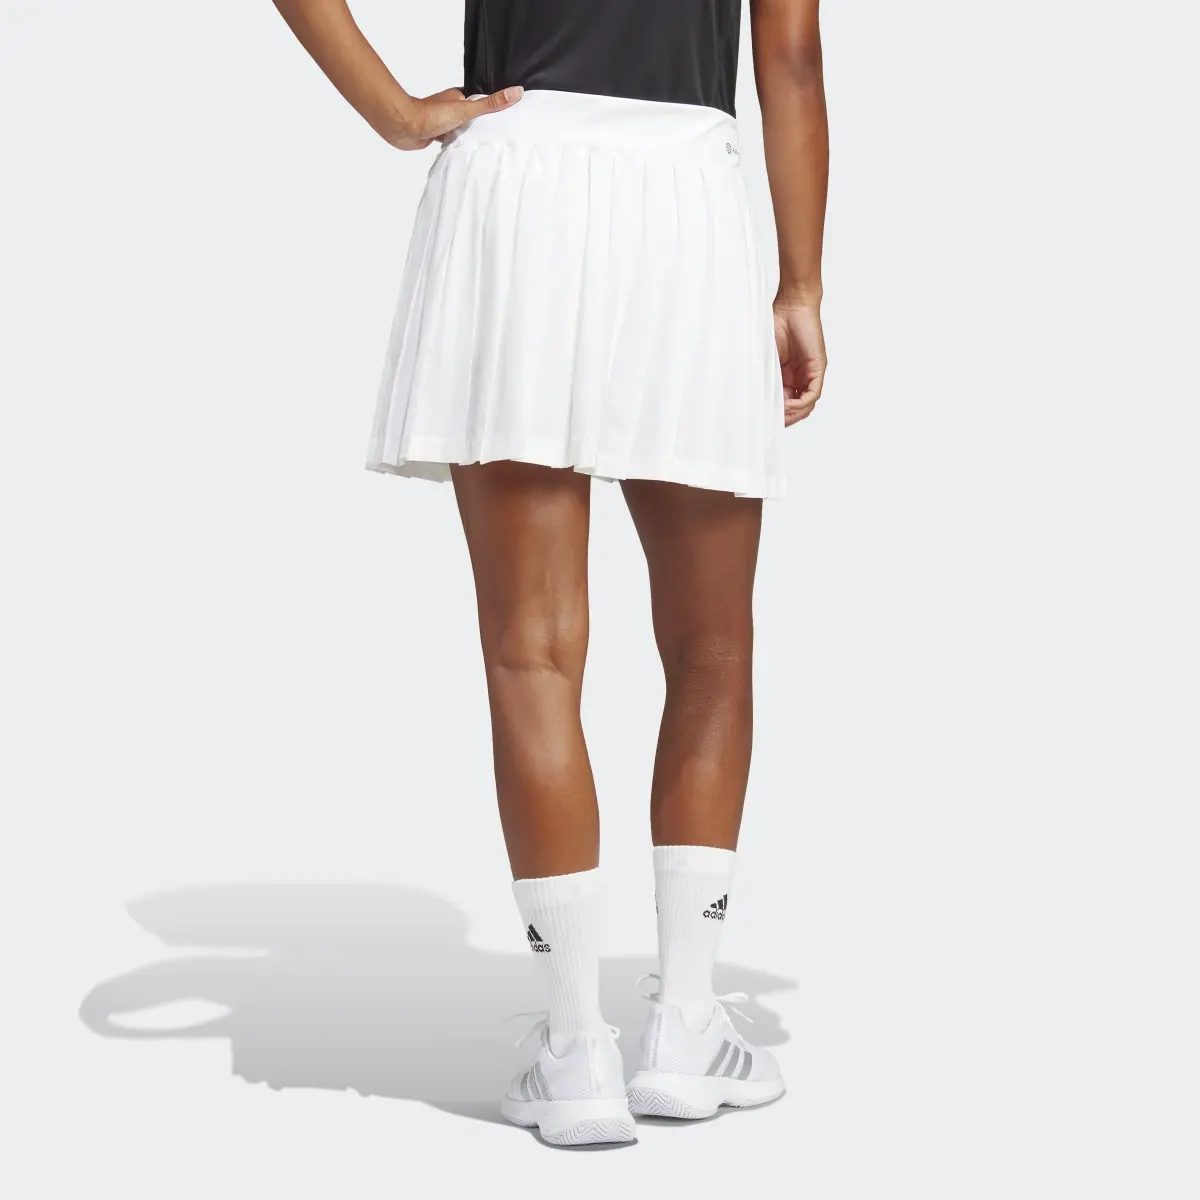 Adidas Clubhouse Premium Classic Tennis Pleated Skirt. 2